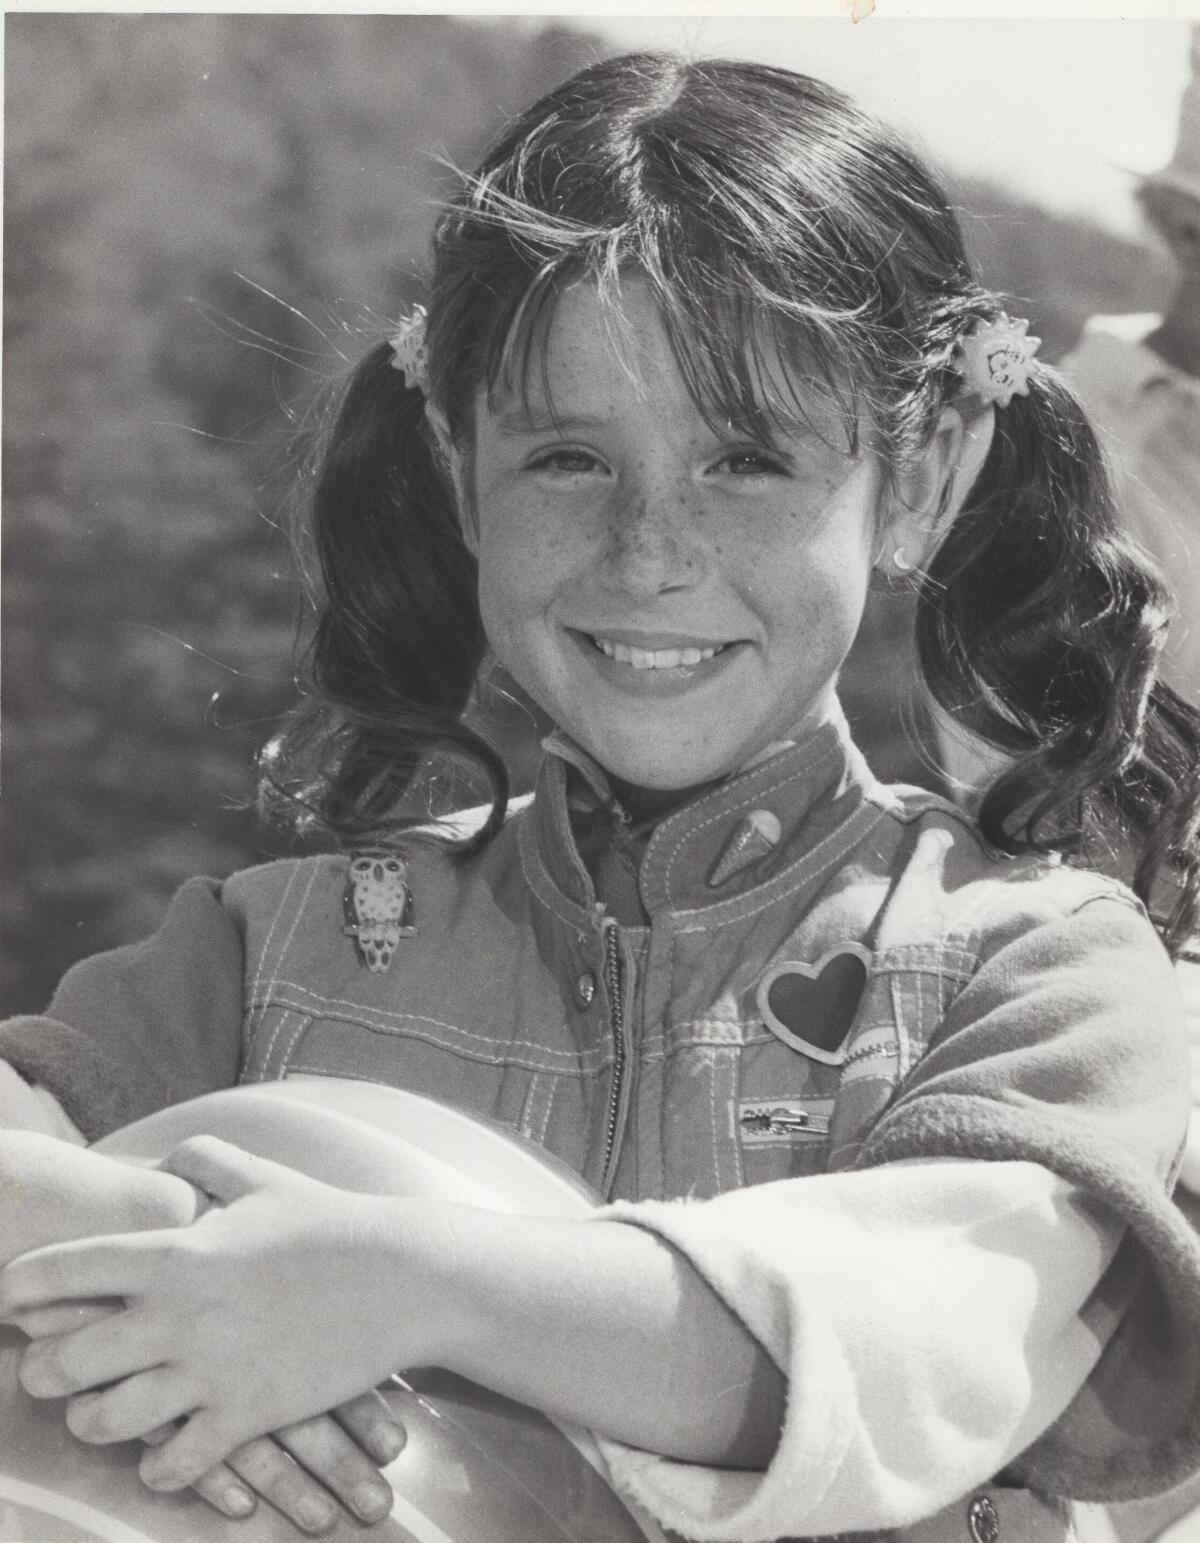 The young Soleil Moon Frye.